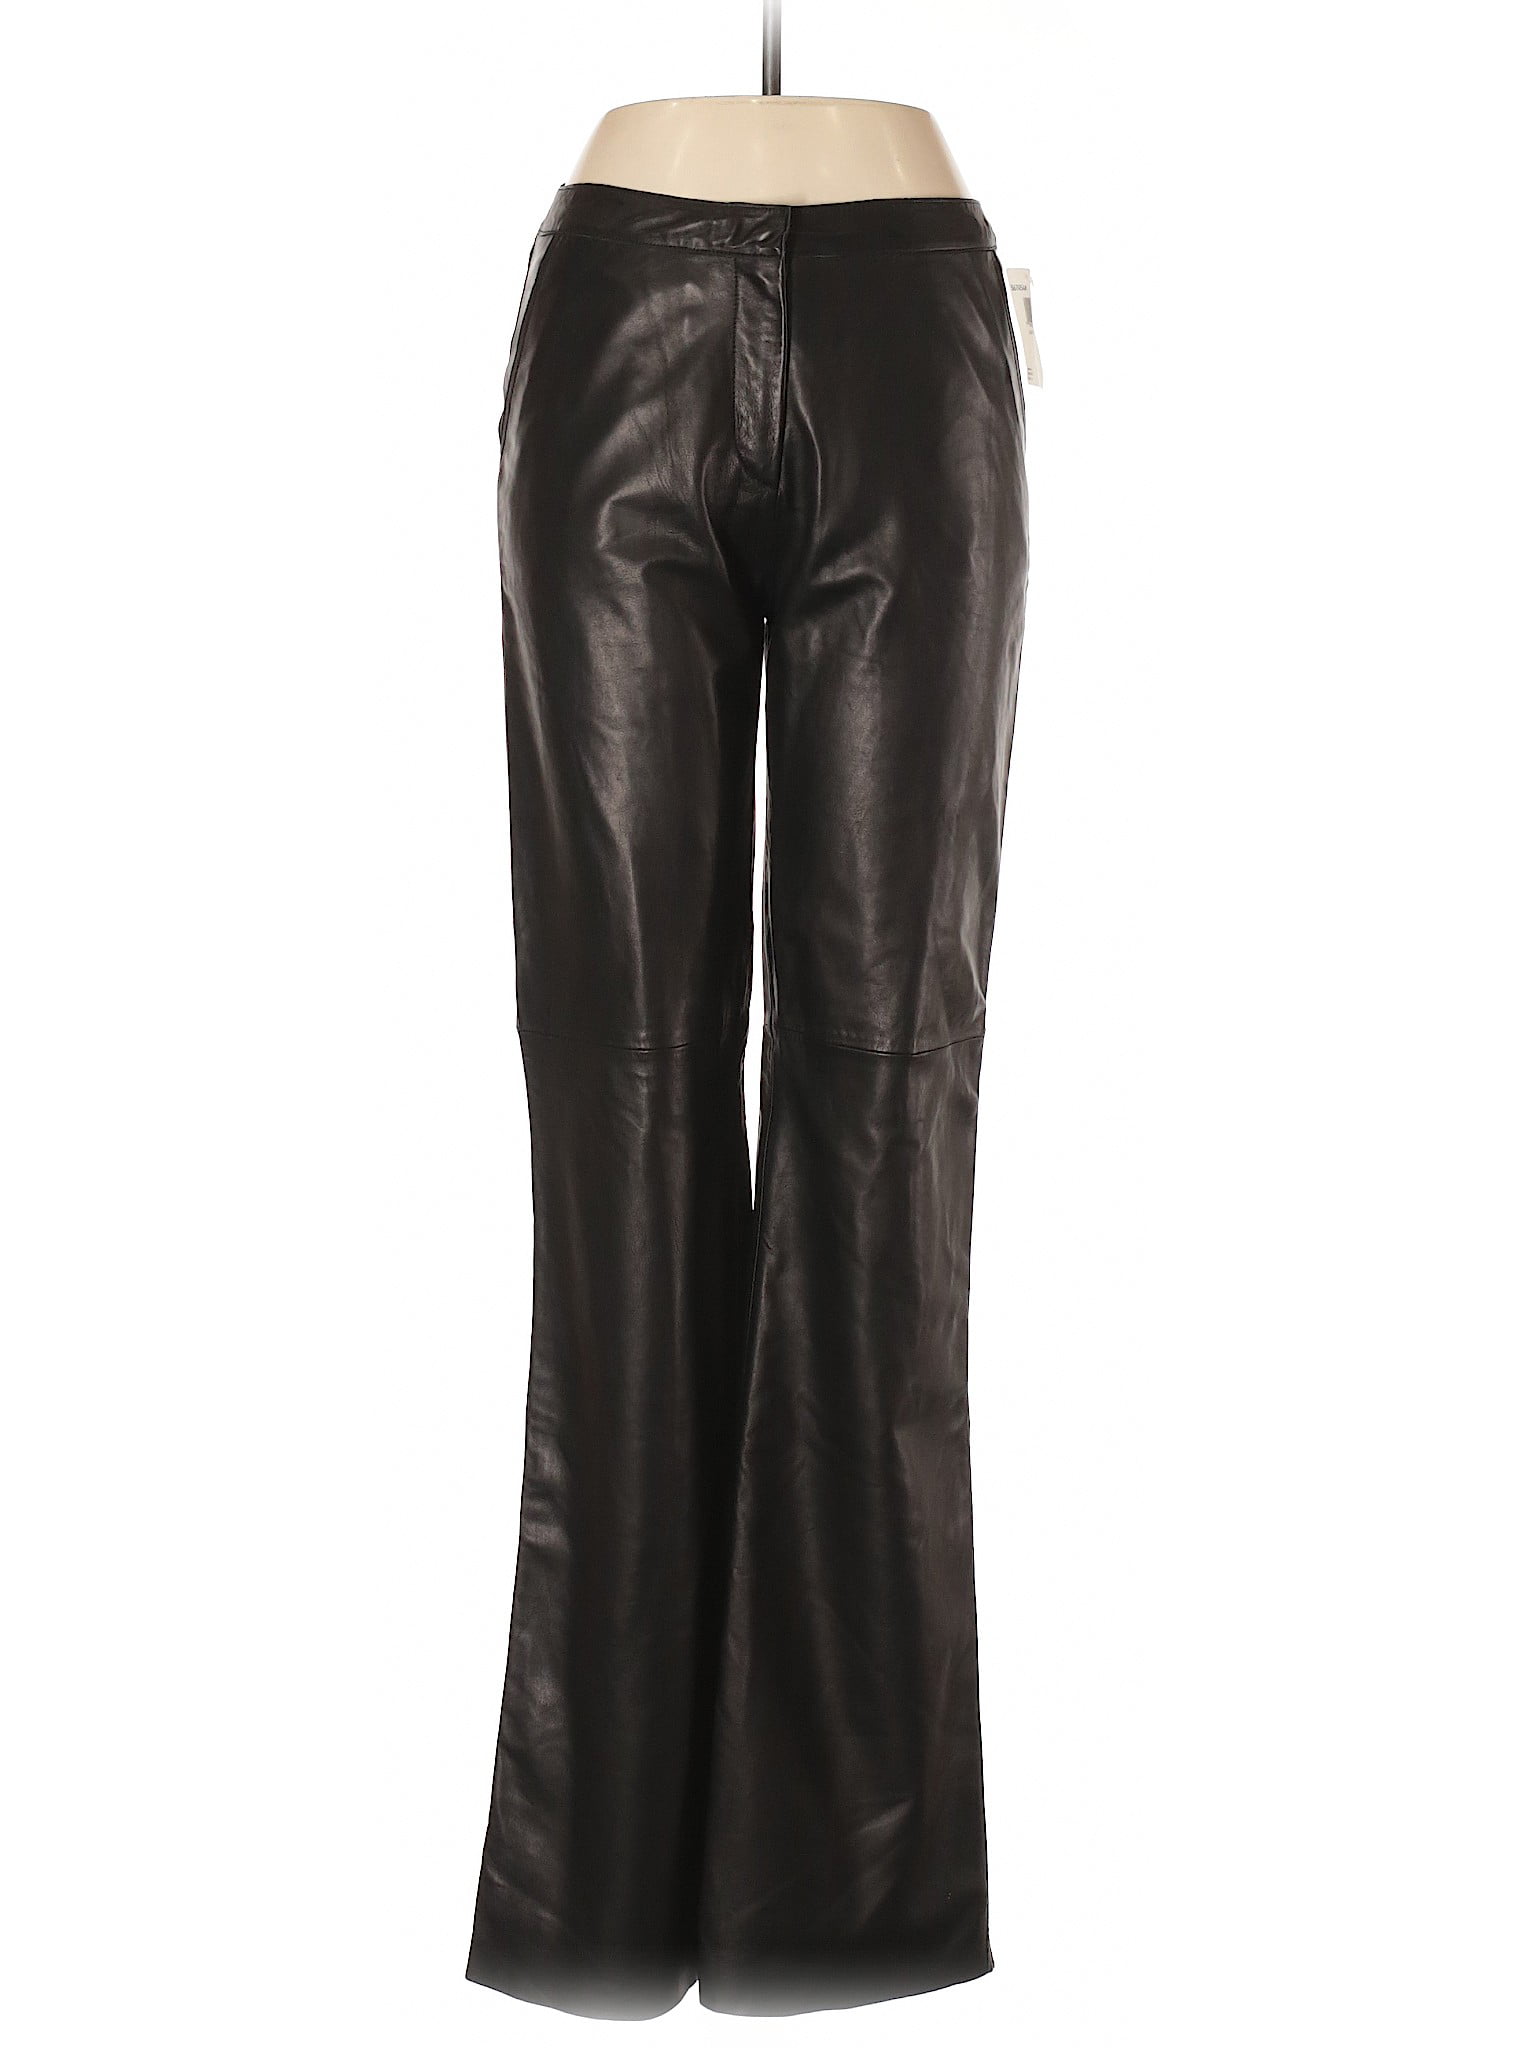 Andrew Marc - Pre-Owned Andrew Marc Women's Size 10 Leather Pants ...